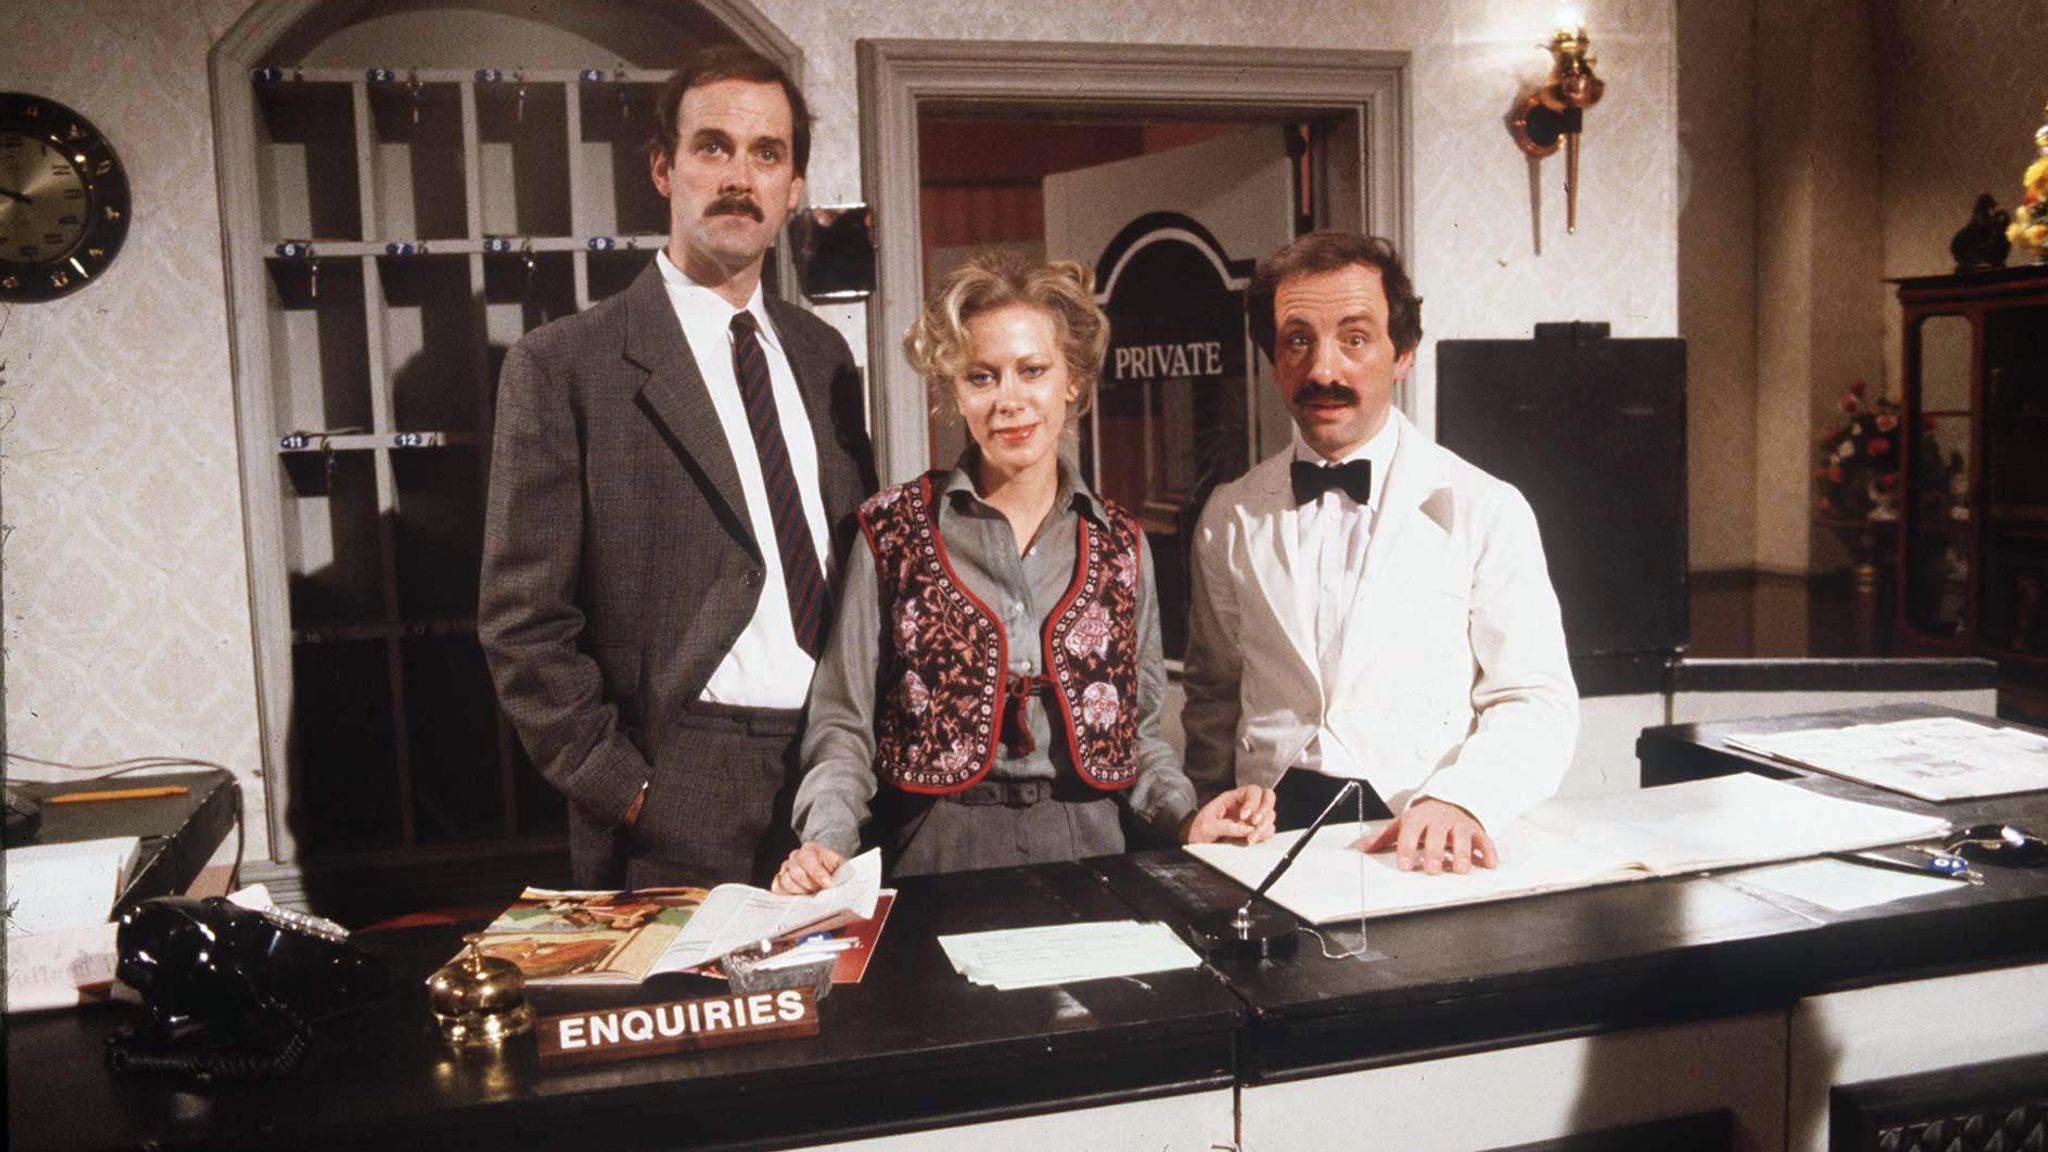 Bbc two programmes fawlty towers torrent tk c clown 2014 torrents